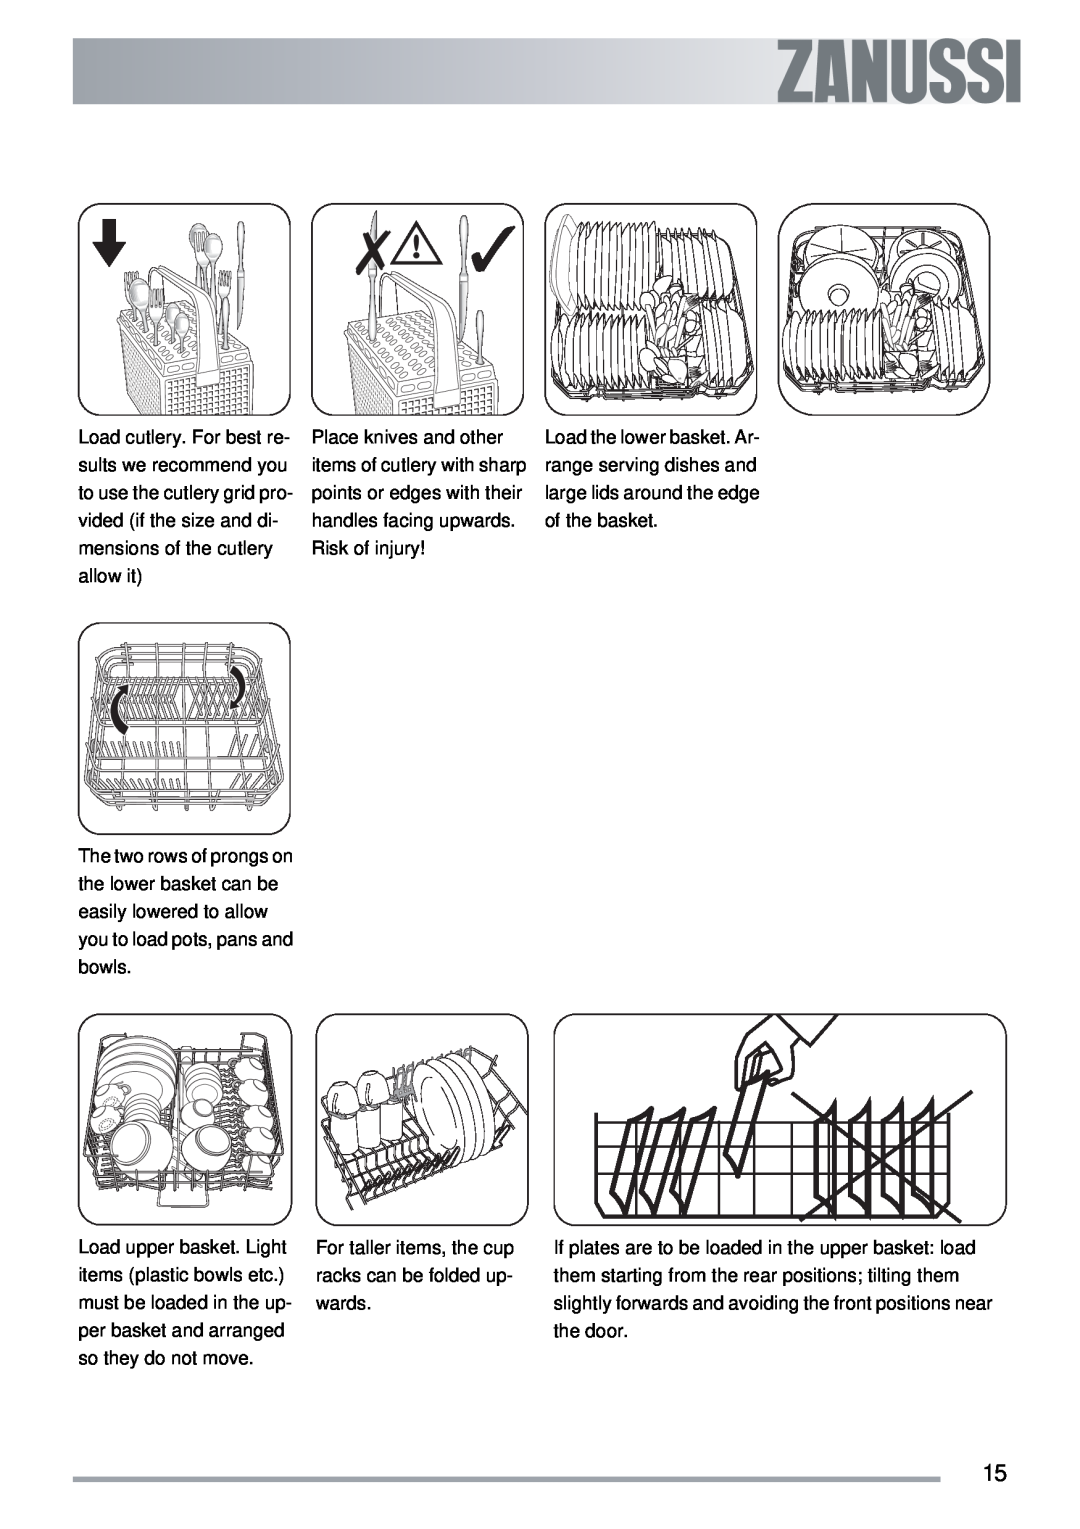 Zanussi ZDT 311 user manual For taller items, the cup racks can be folded up- wards 